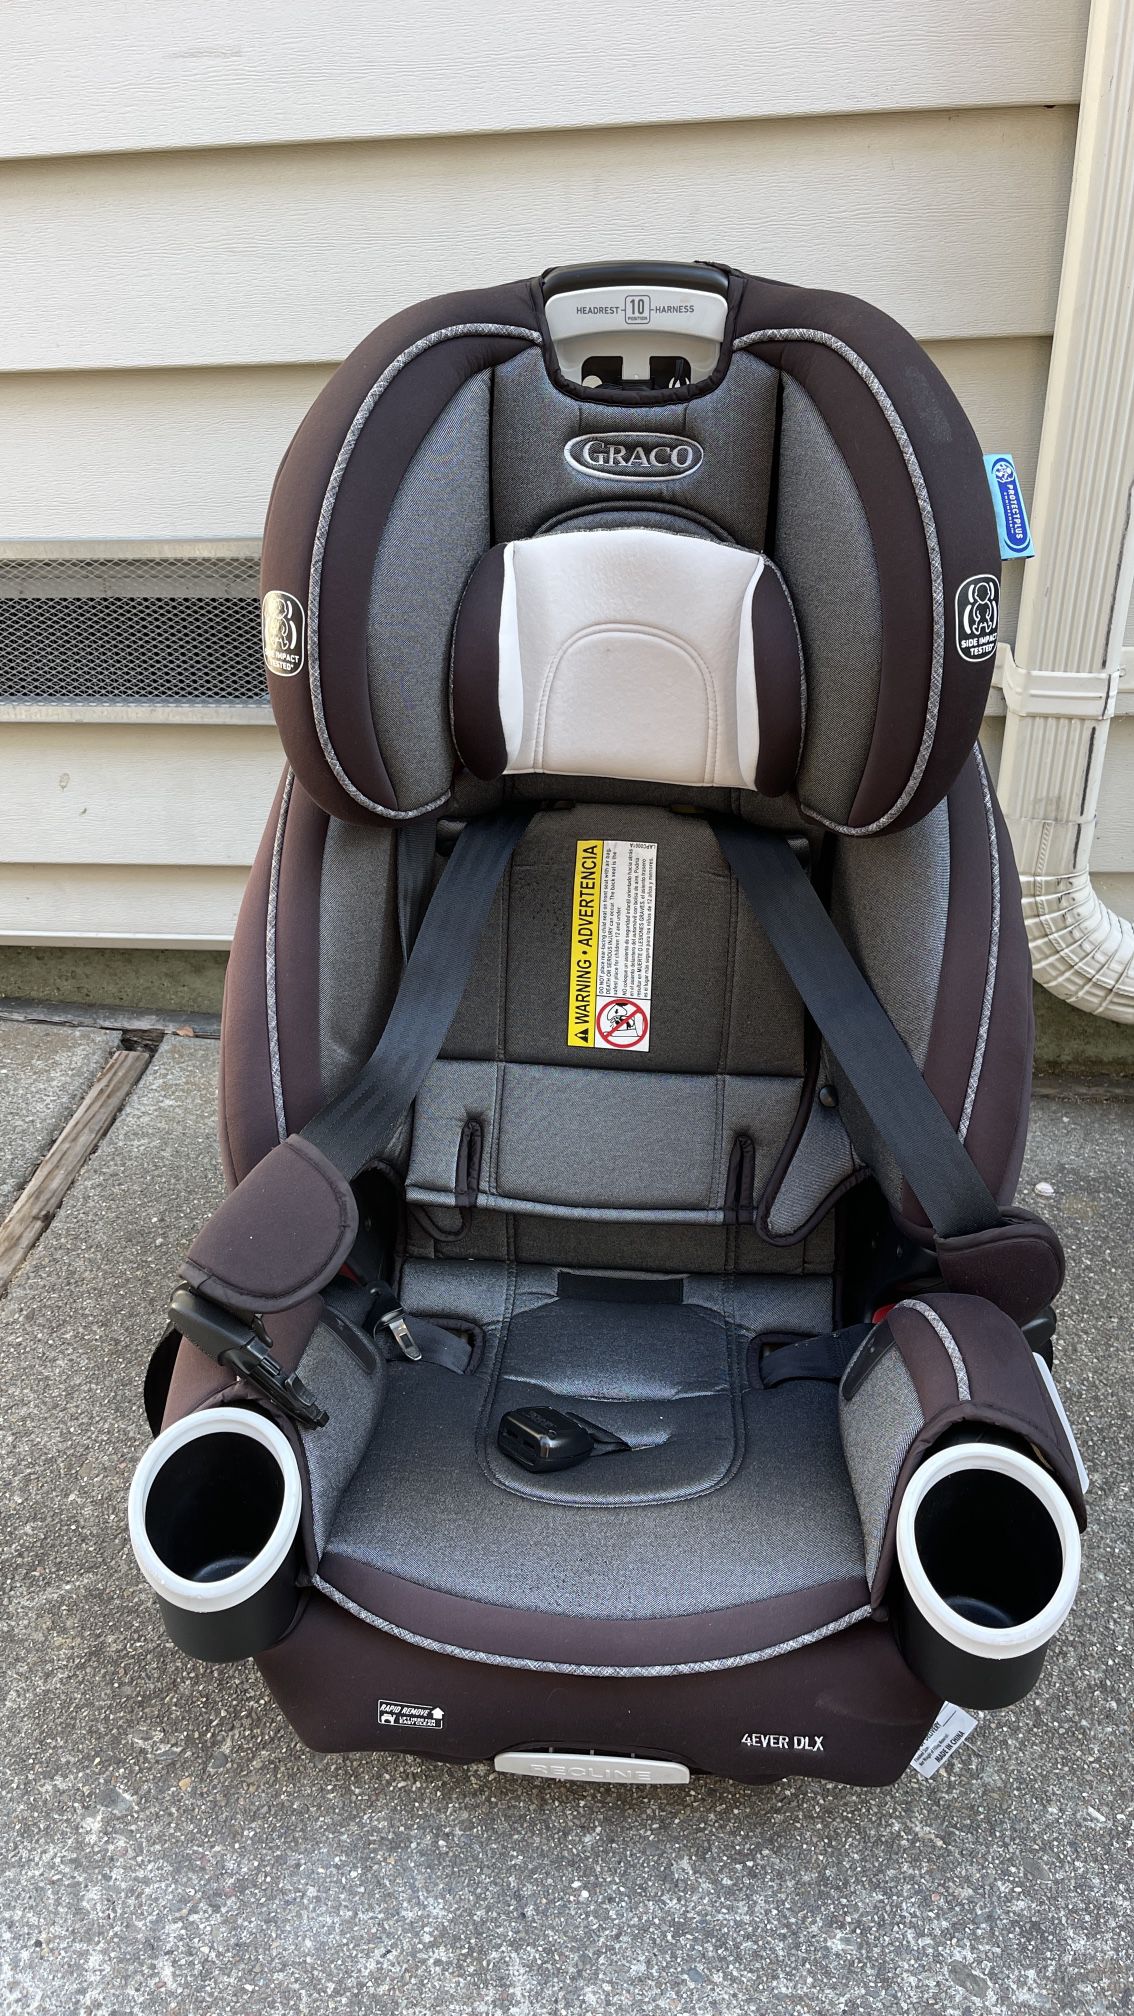 Graco 4Ever DLX 4 in 1 Car Seat, Infant to Toddler Car Seat, with 10 Years of Use, 20x21.5x24 Inch